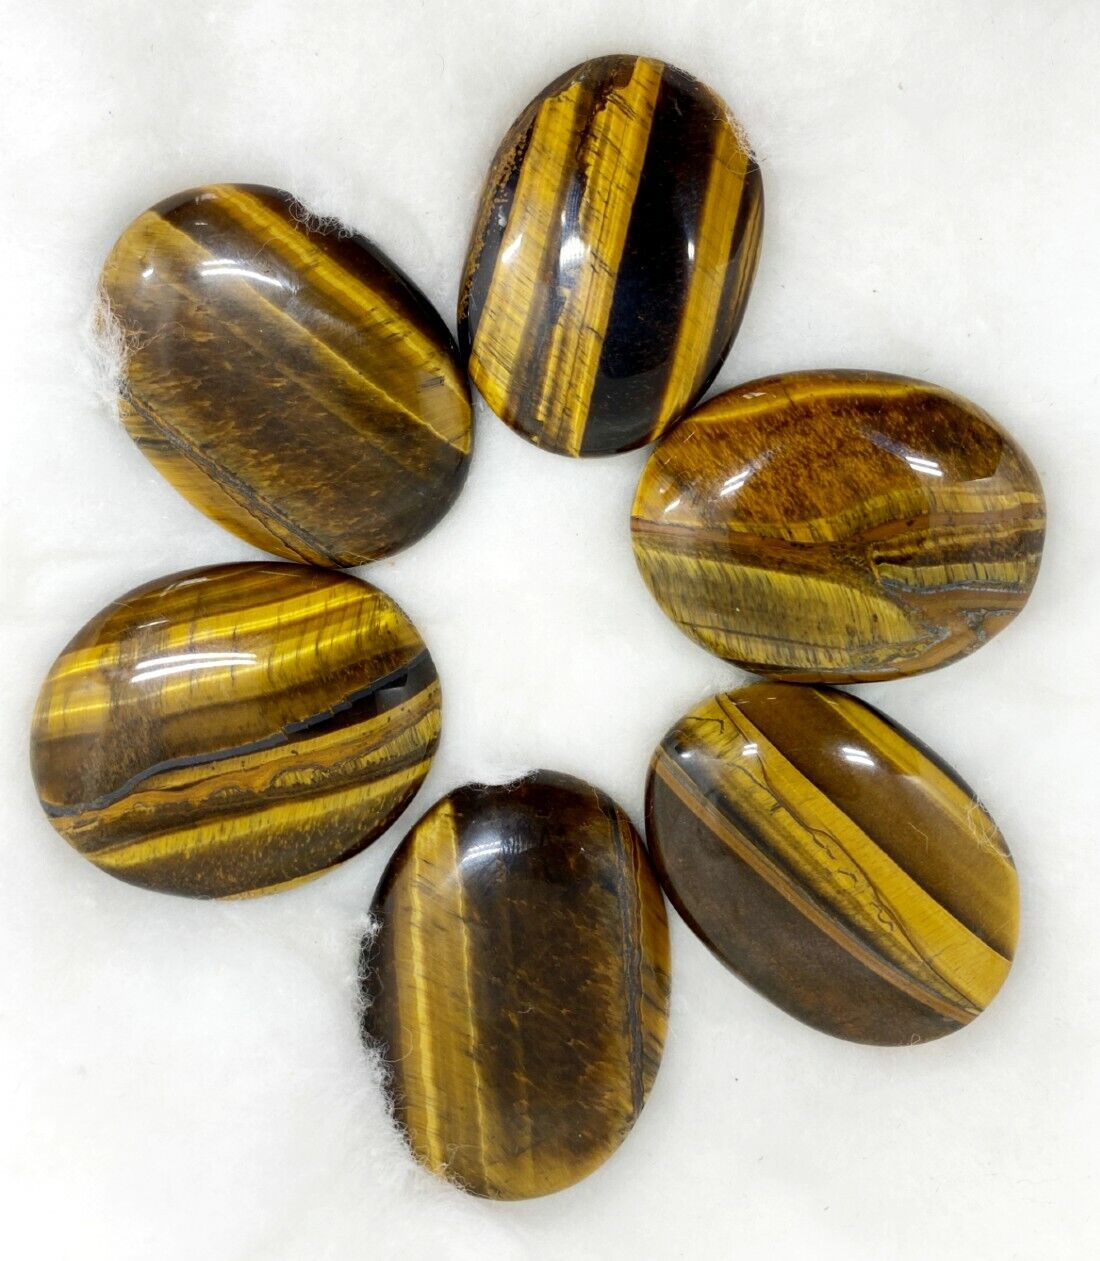 One (1) Natural Tiger Eye Worry Stone, Thumb Stone.